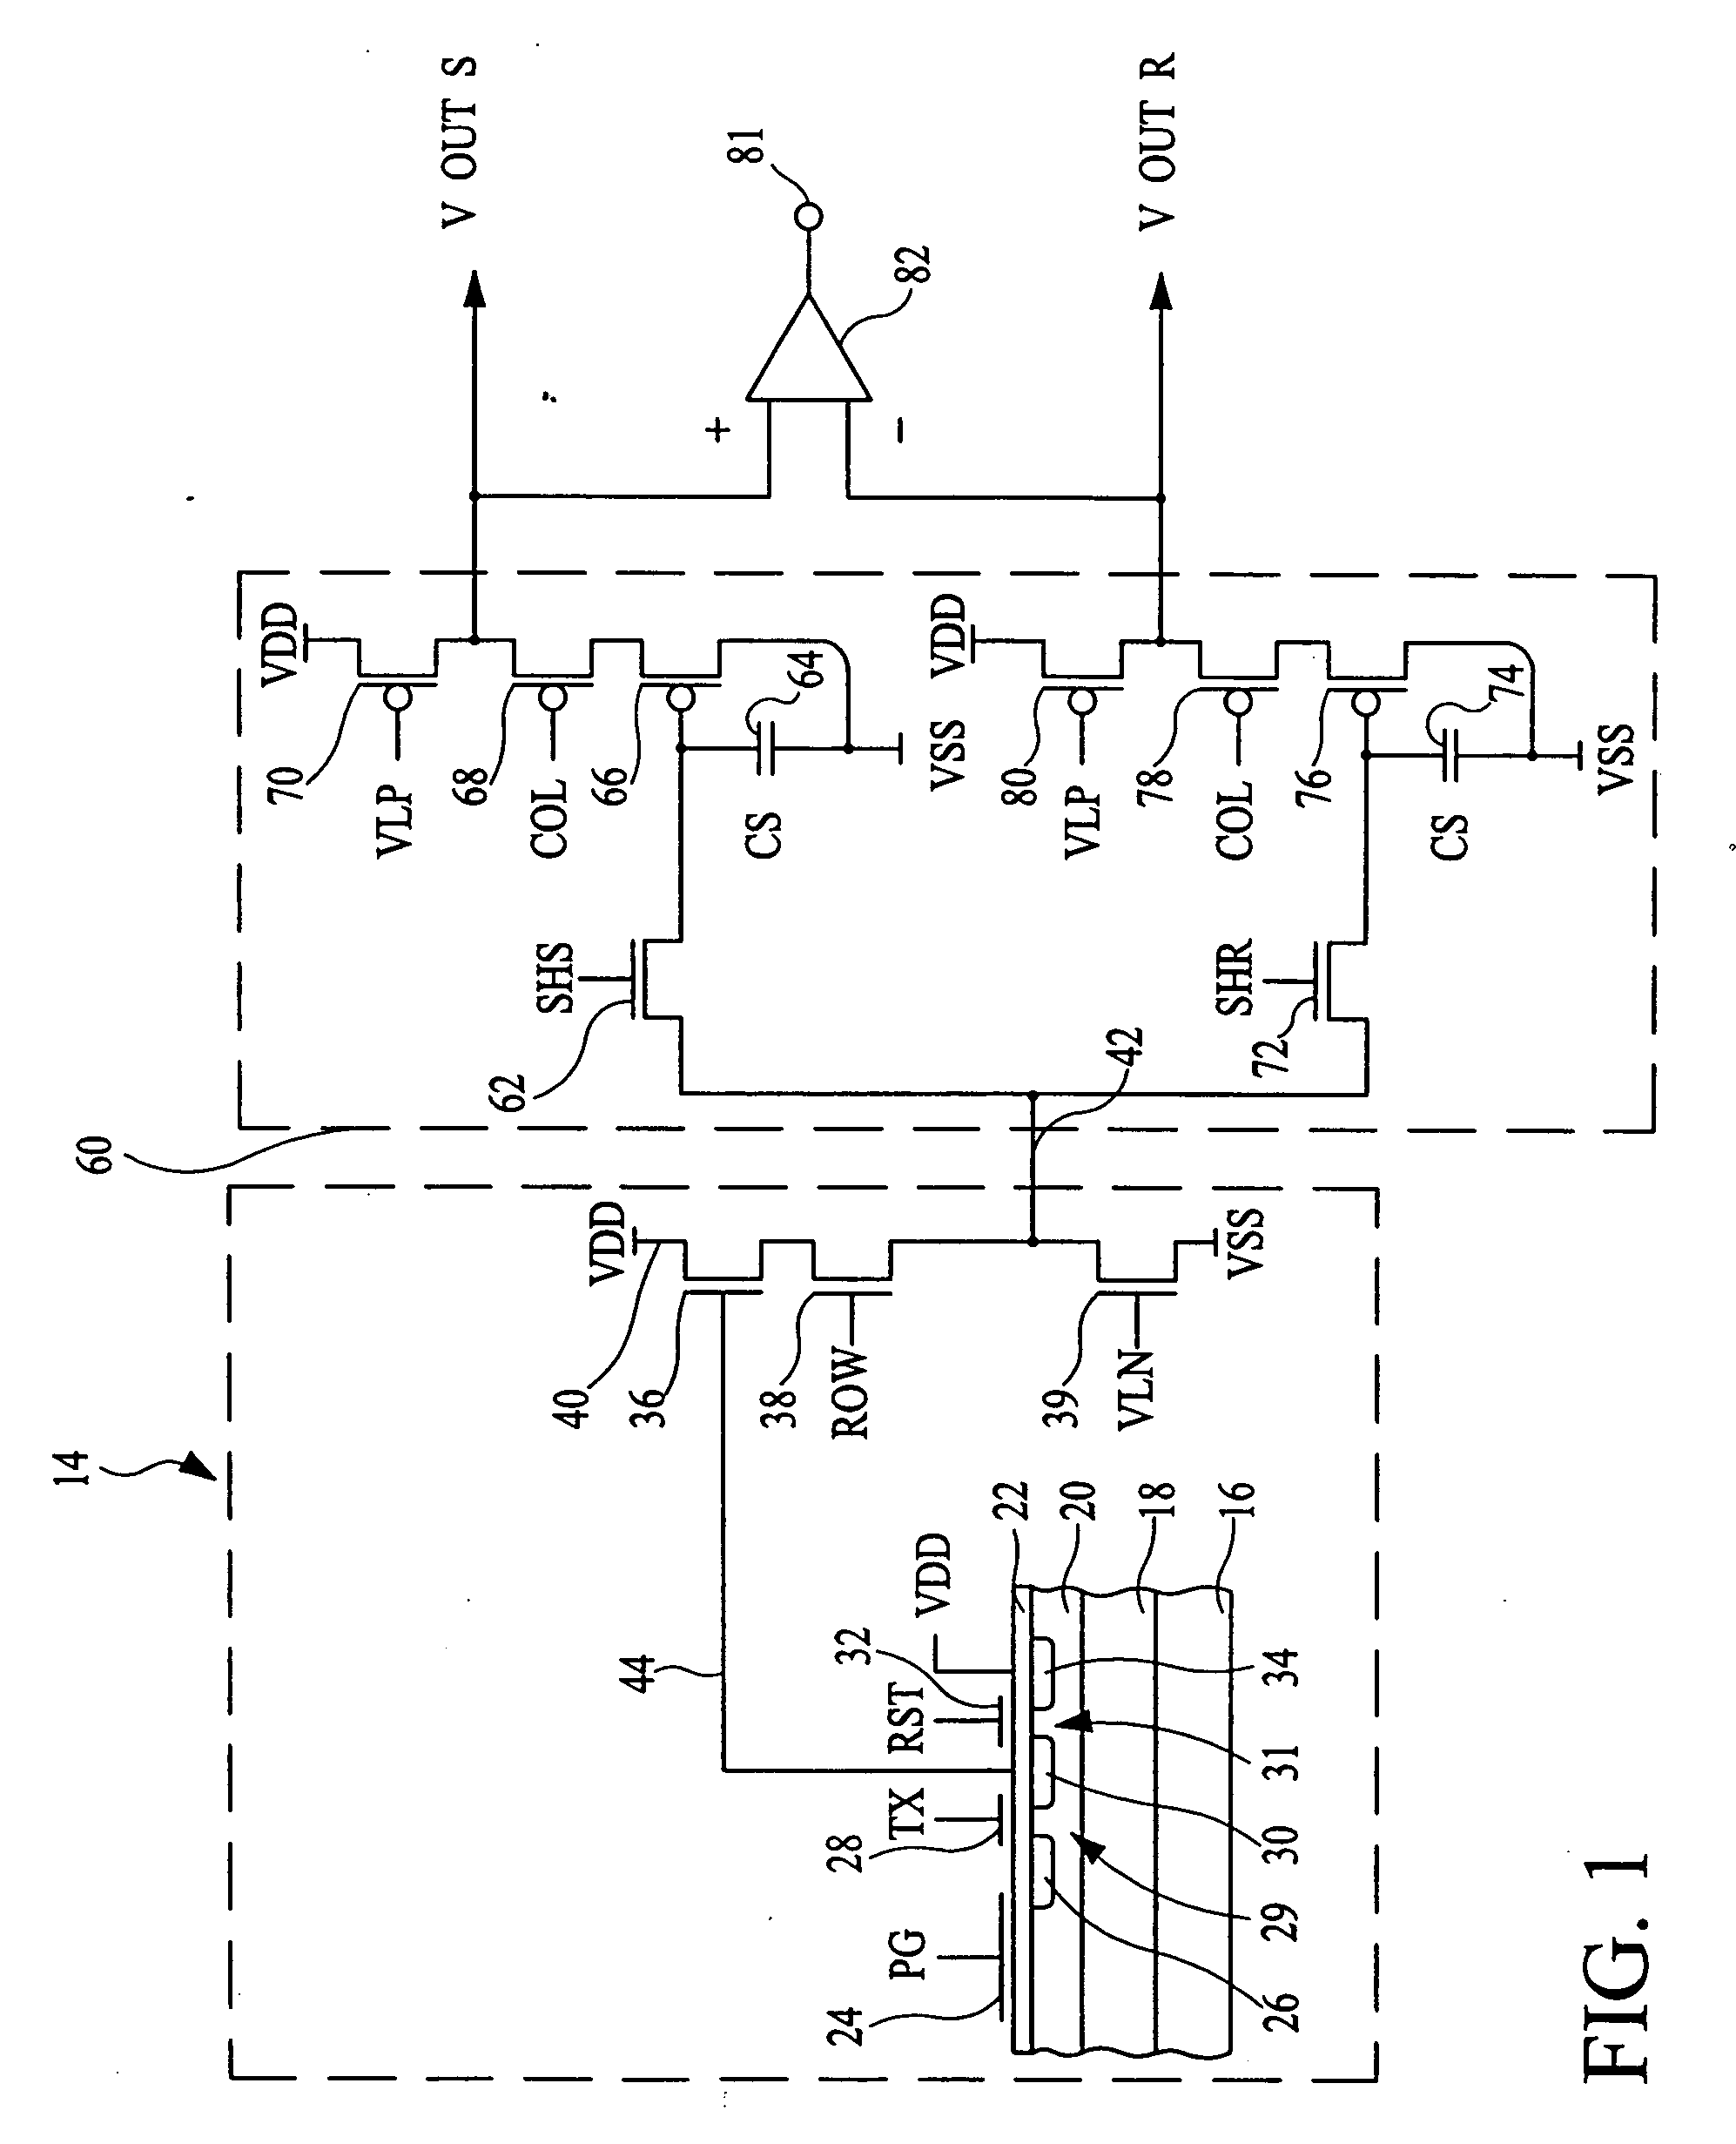 CMOS imager with selectively silicided gates